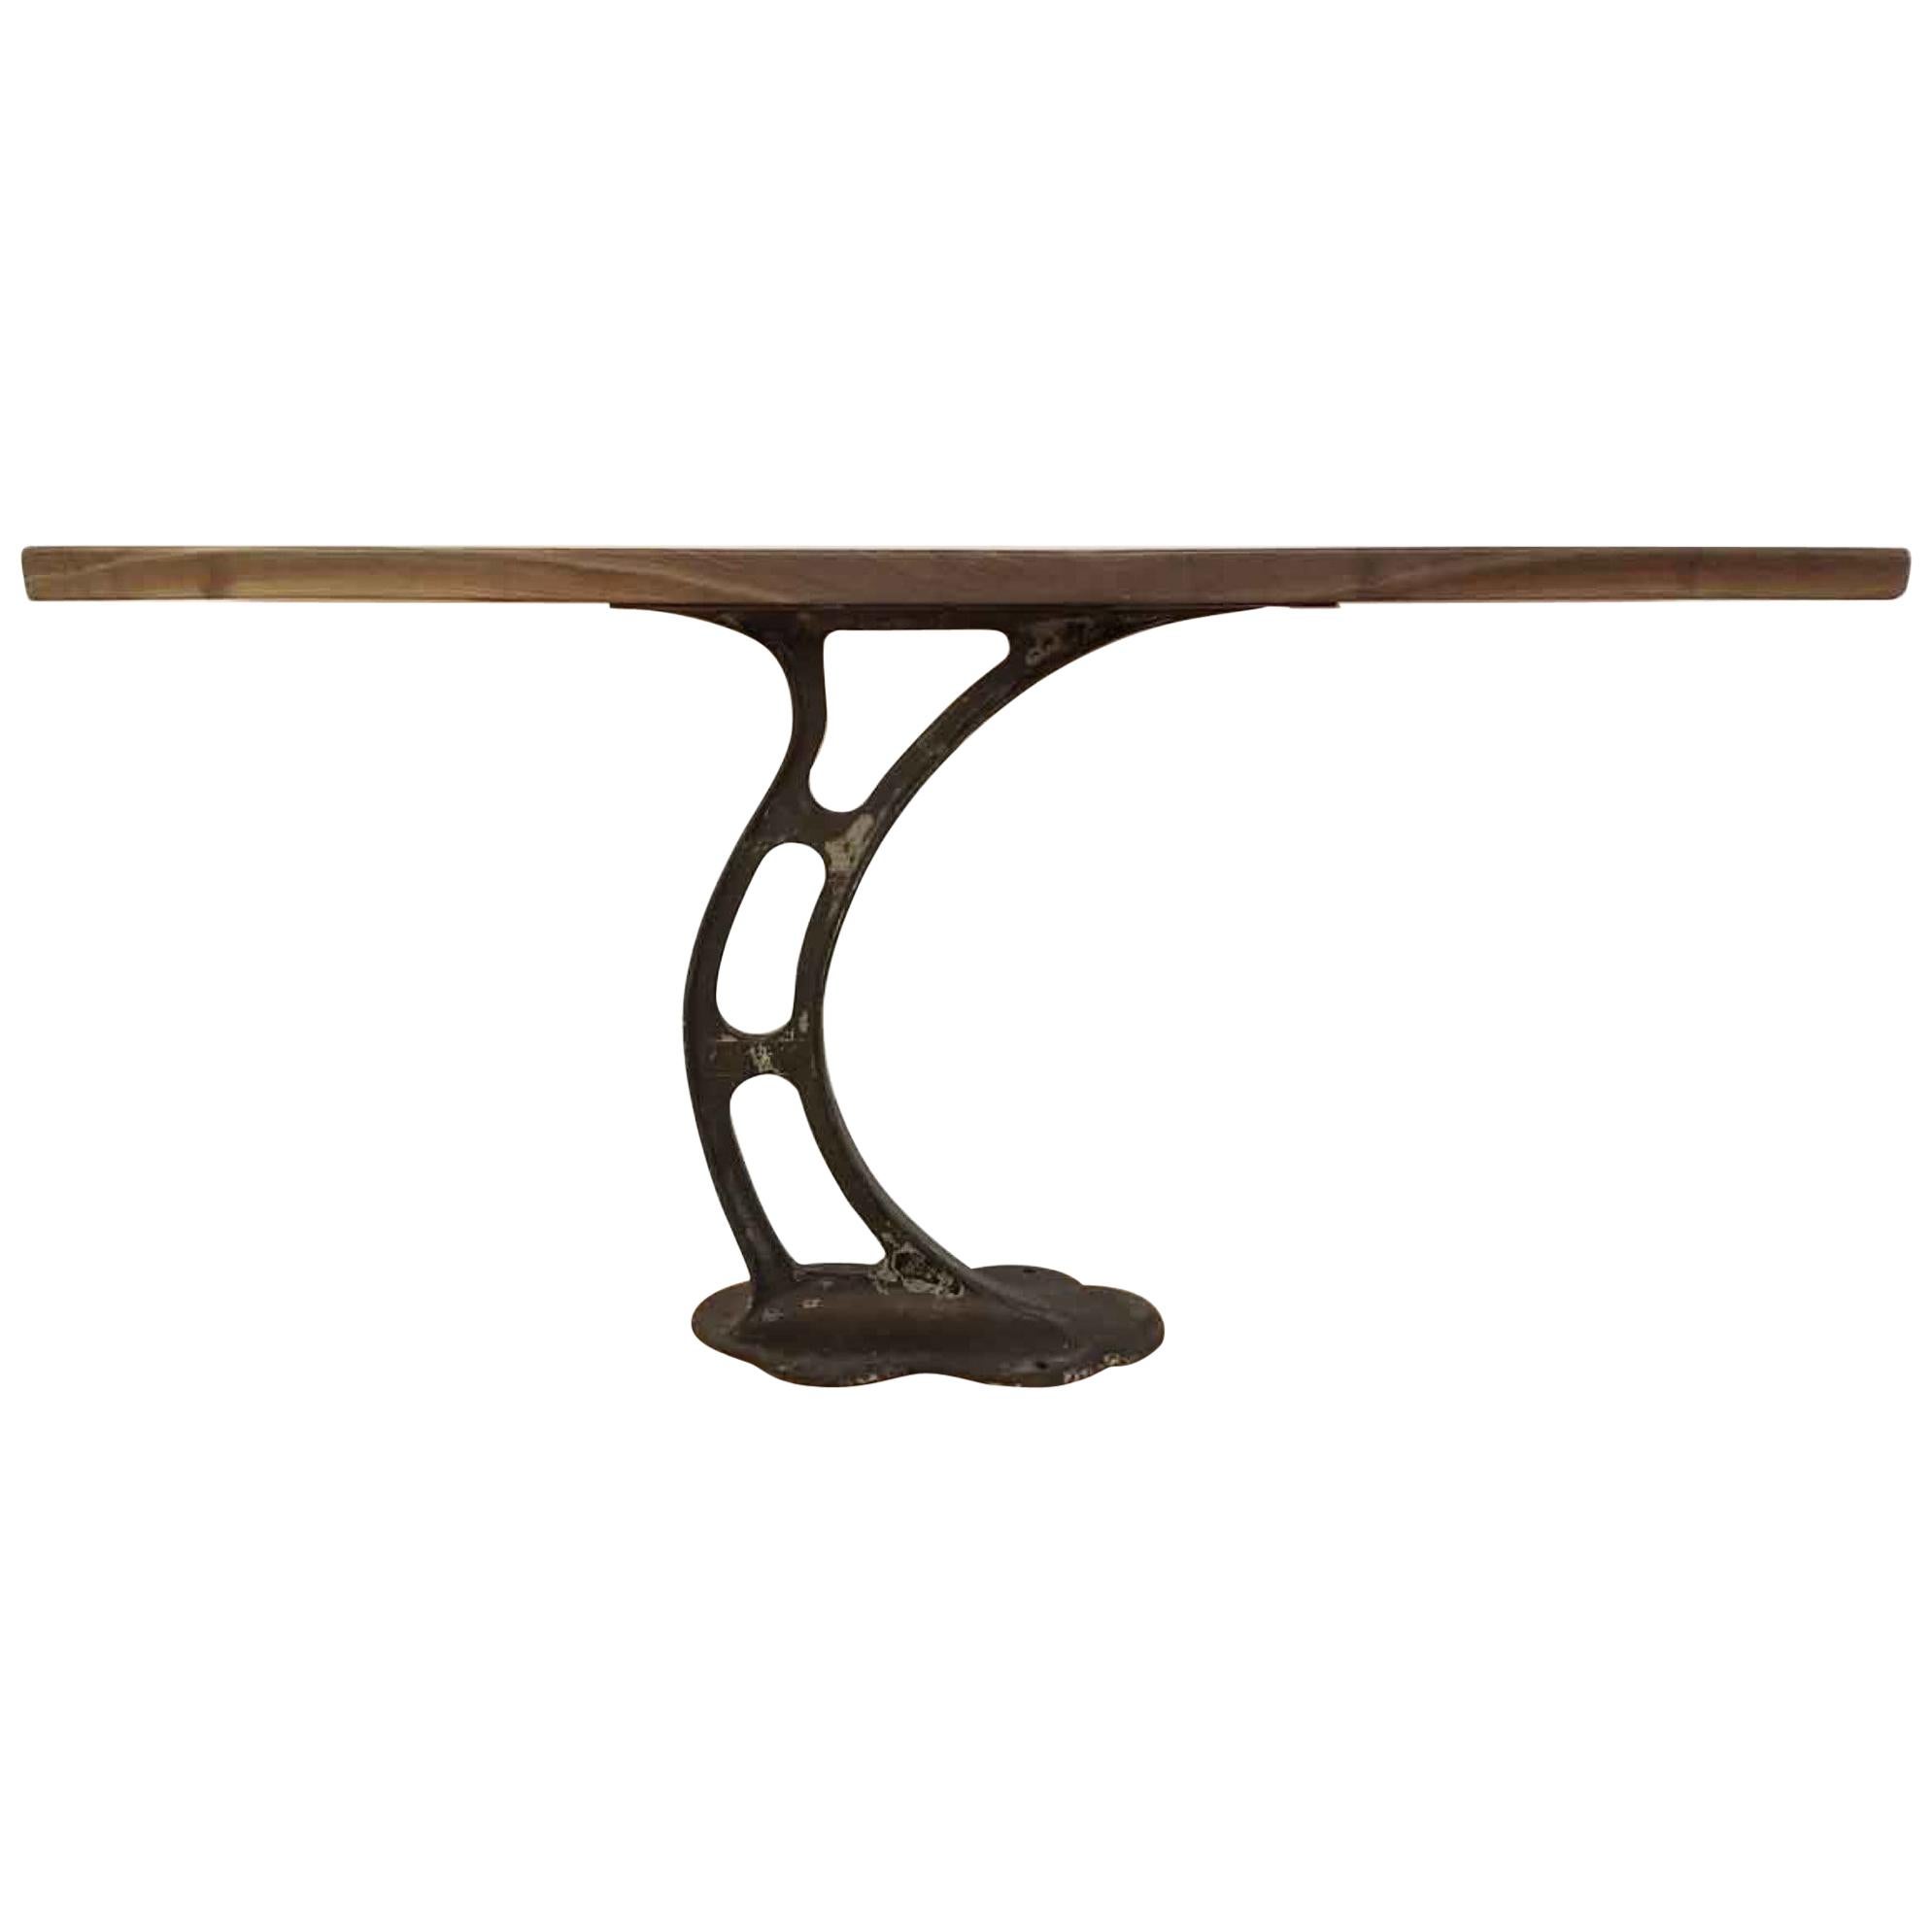 Solid Walnut Console Table with Industrial Base 1920s Cast Iron